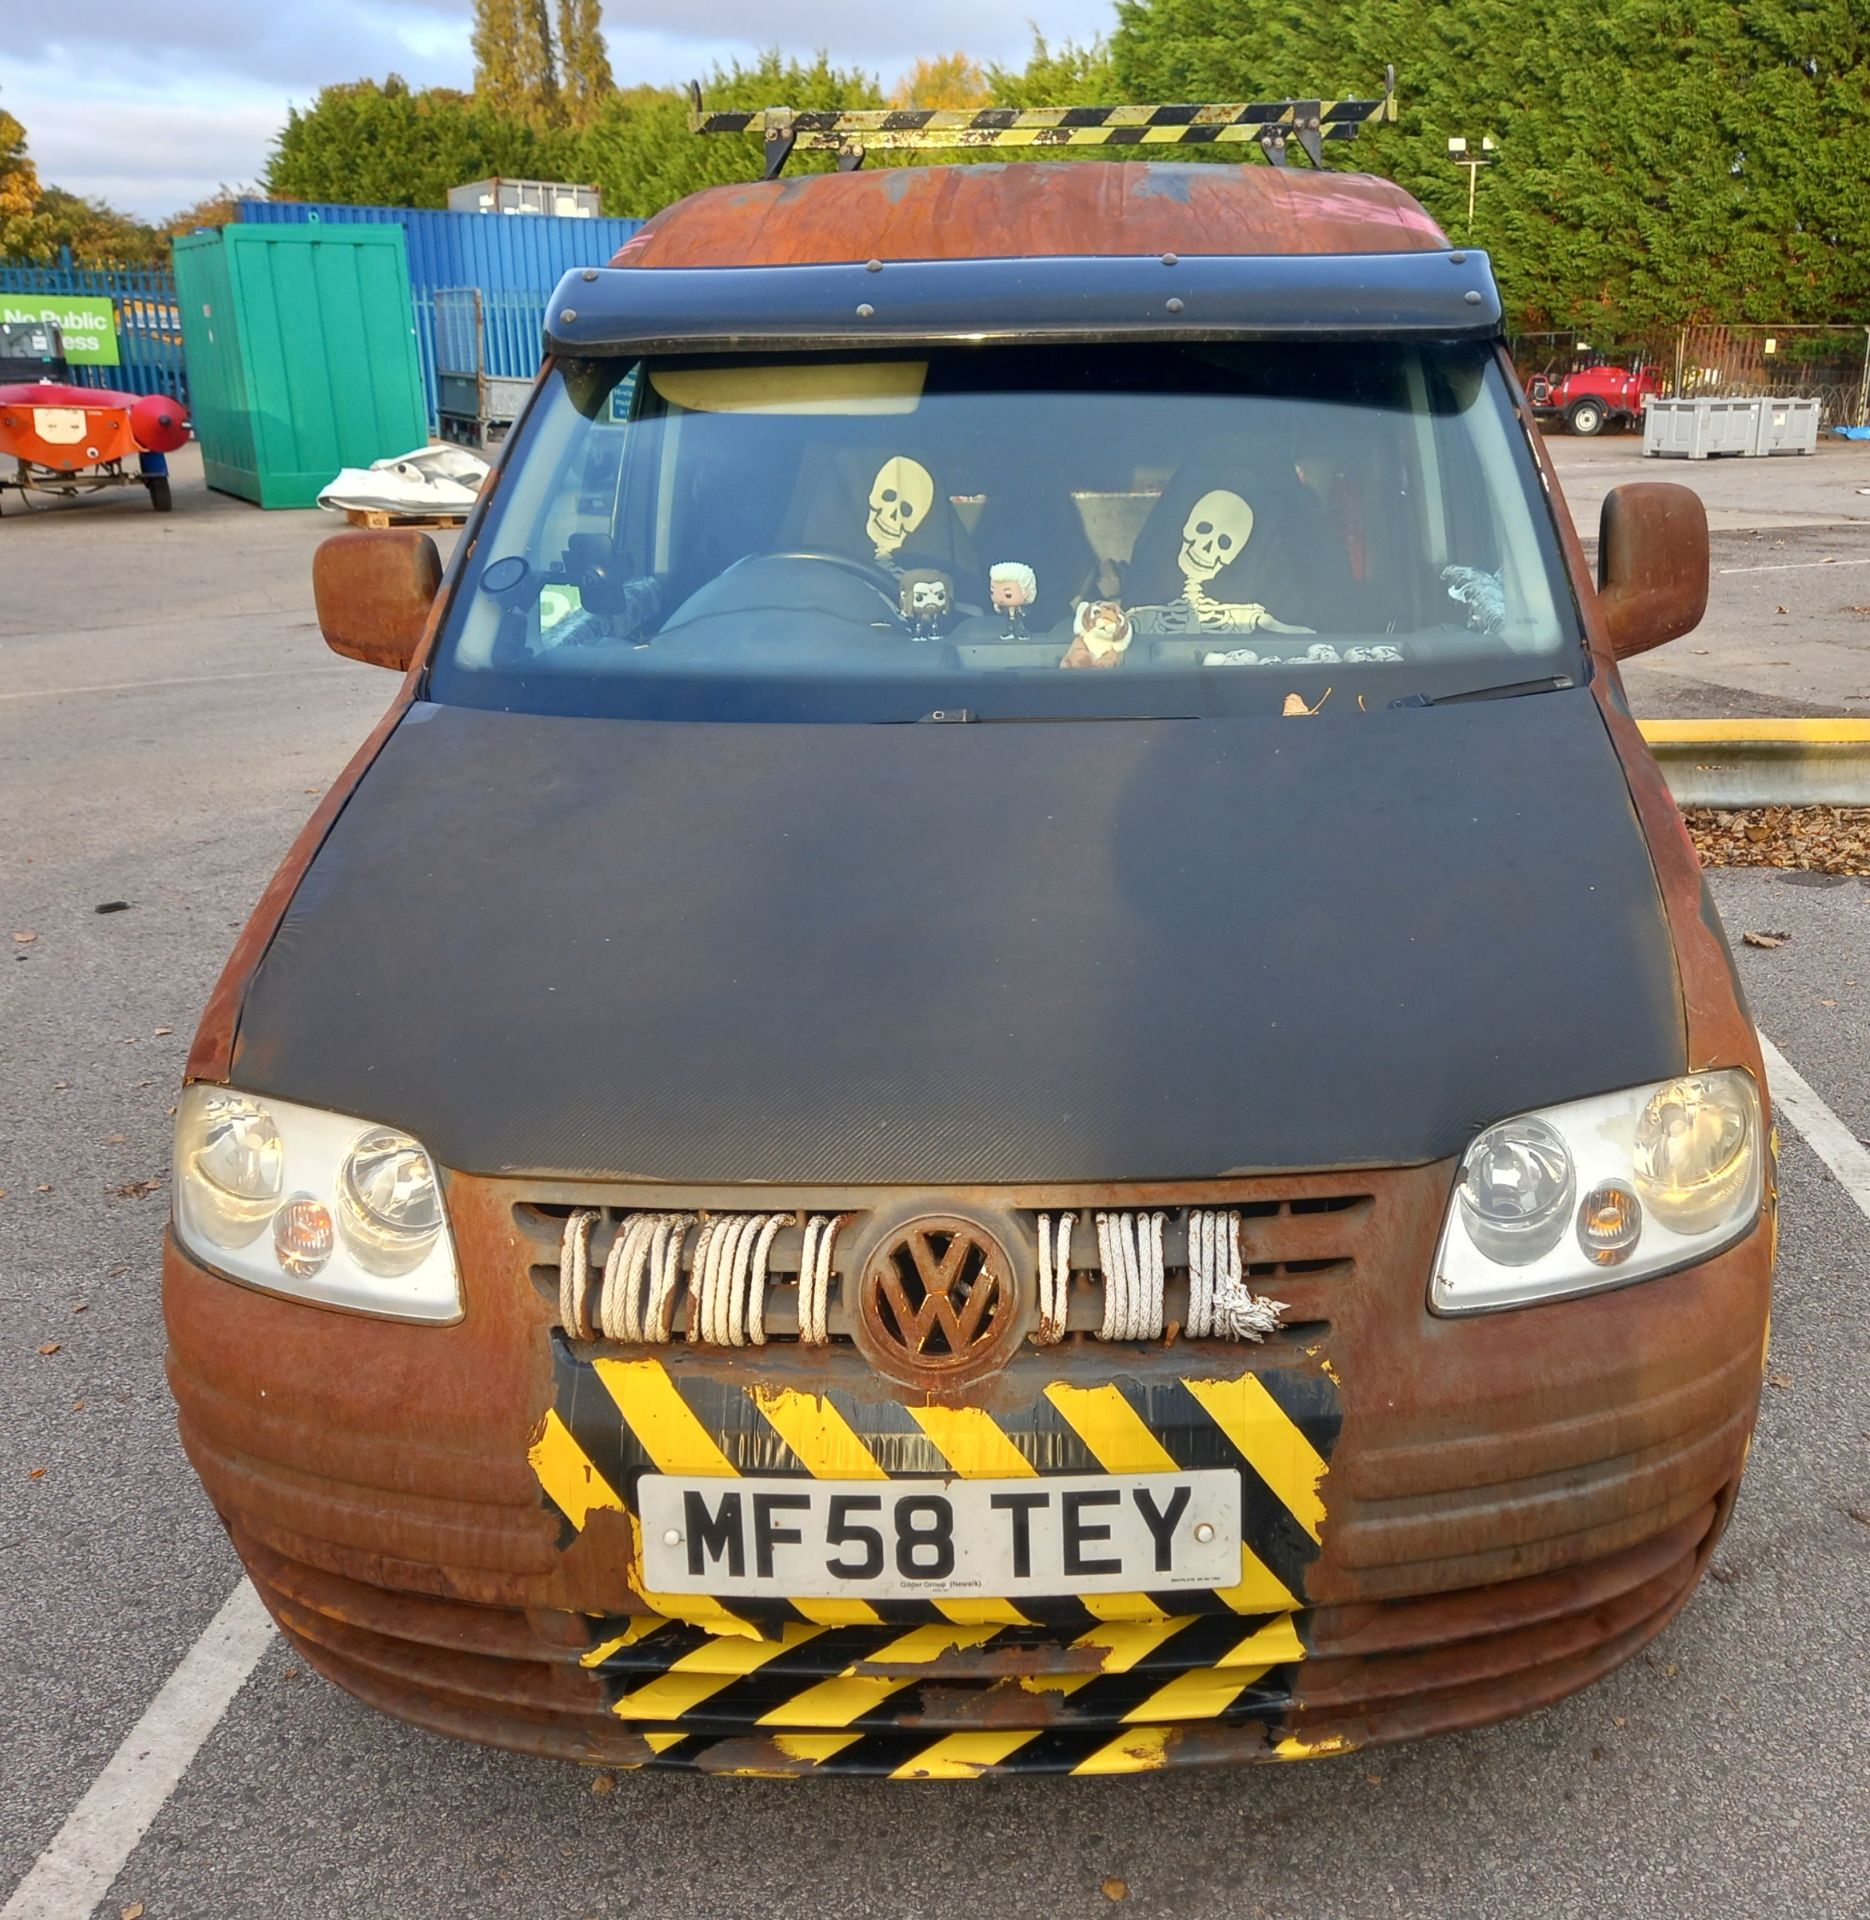 2008 (58) Volkswagen Caddy C20 TDI 1896cc converted day van with rust effect paint - Image 7 of 53